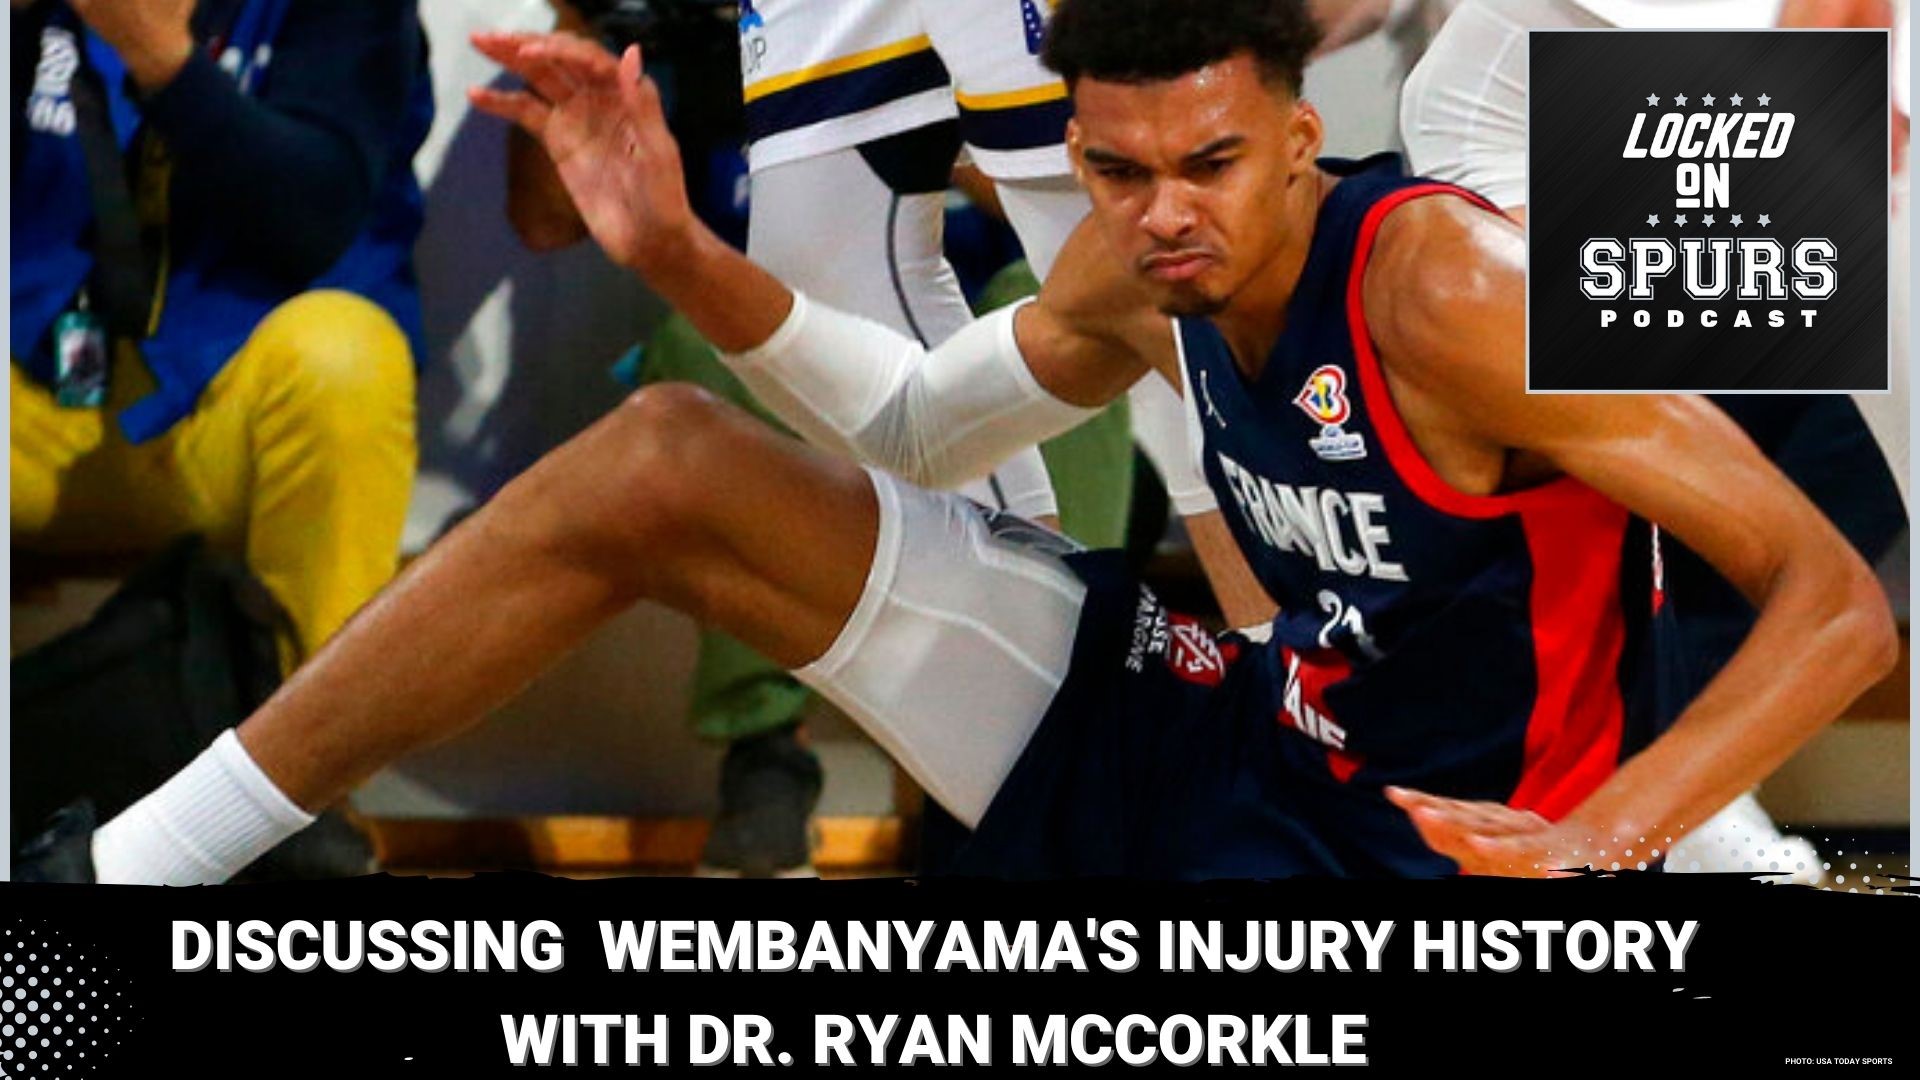 Dr. McCorkle gives an in-depth discussion on Wembanyama's injury history.